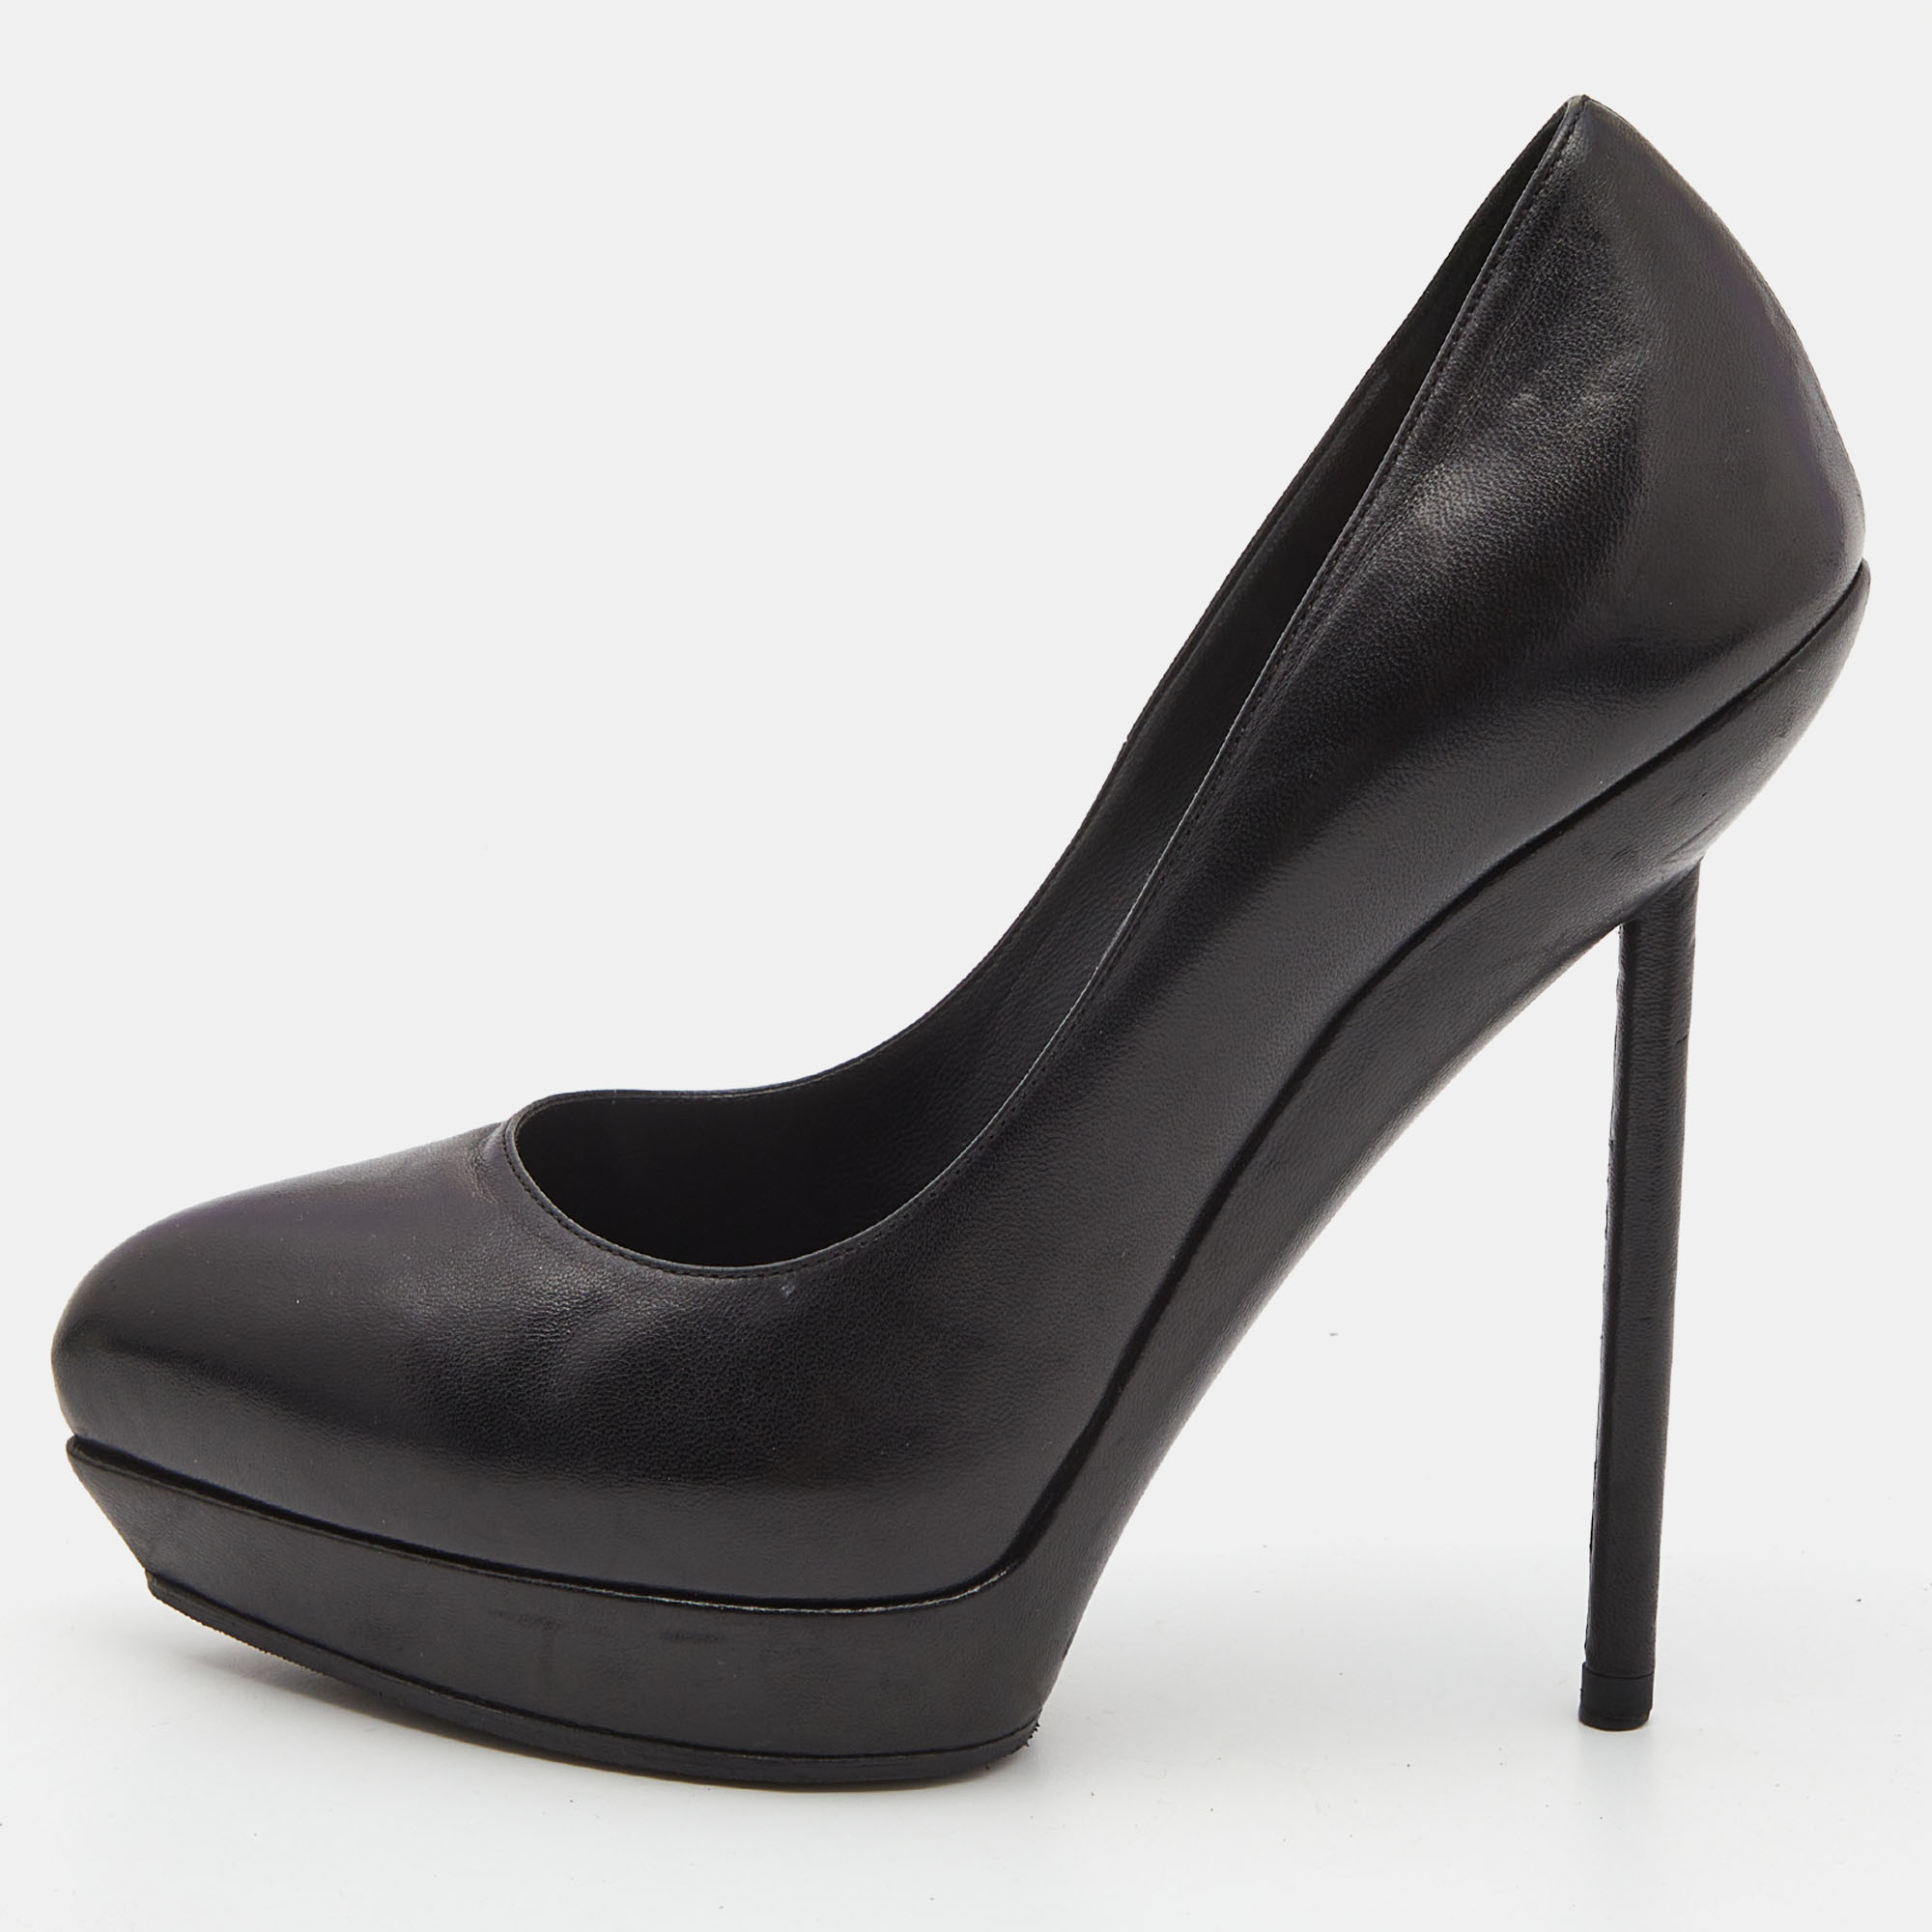 The fashion house's tradition of excellence coupled with modern design sensibilities works to make these YSL platform pumps a fabulous choice. Theyll help you deliver a chic look with ease.